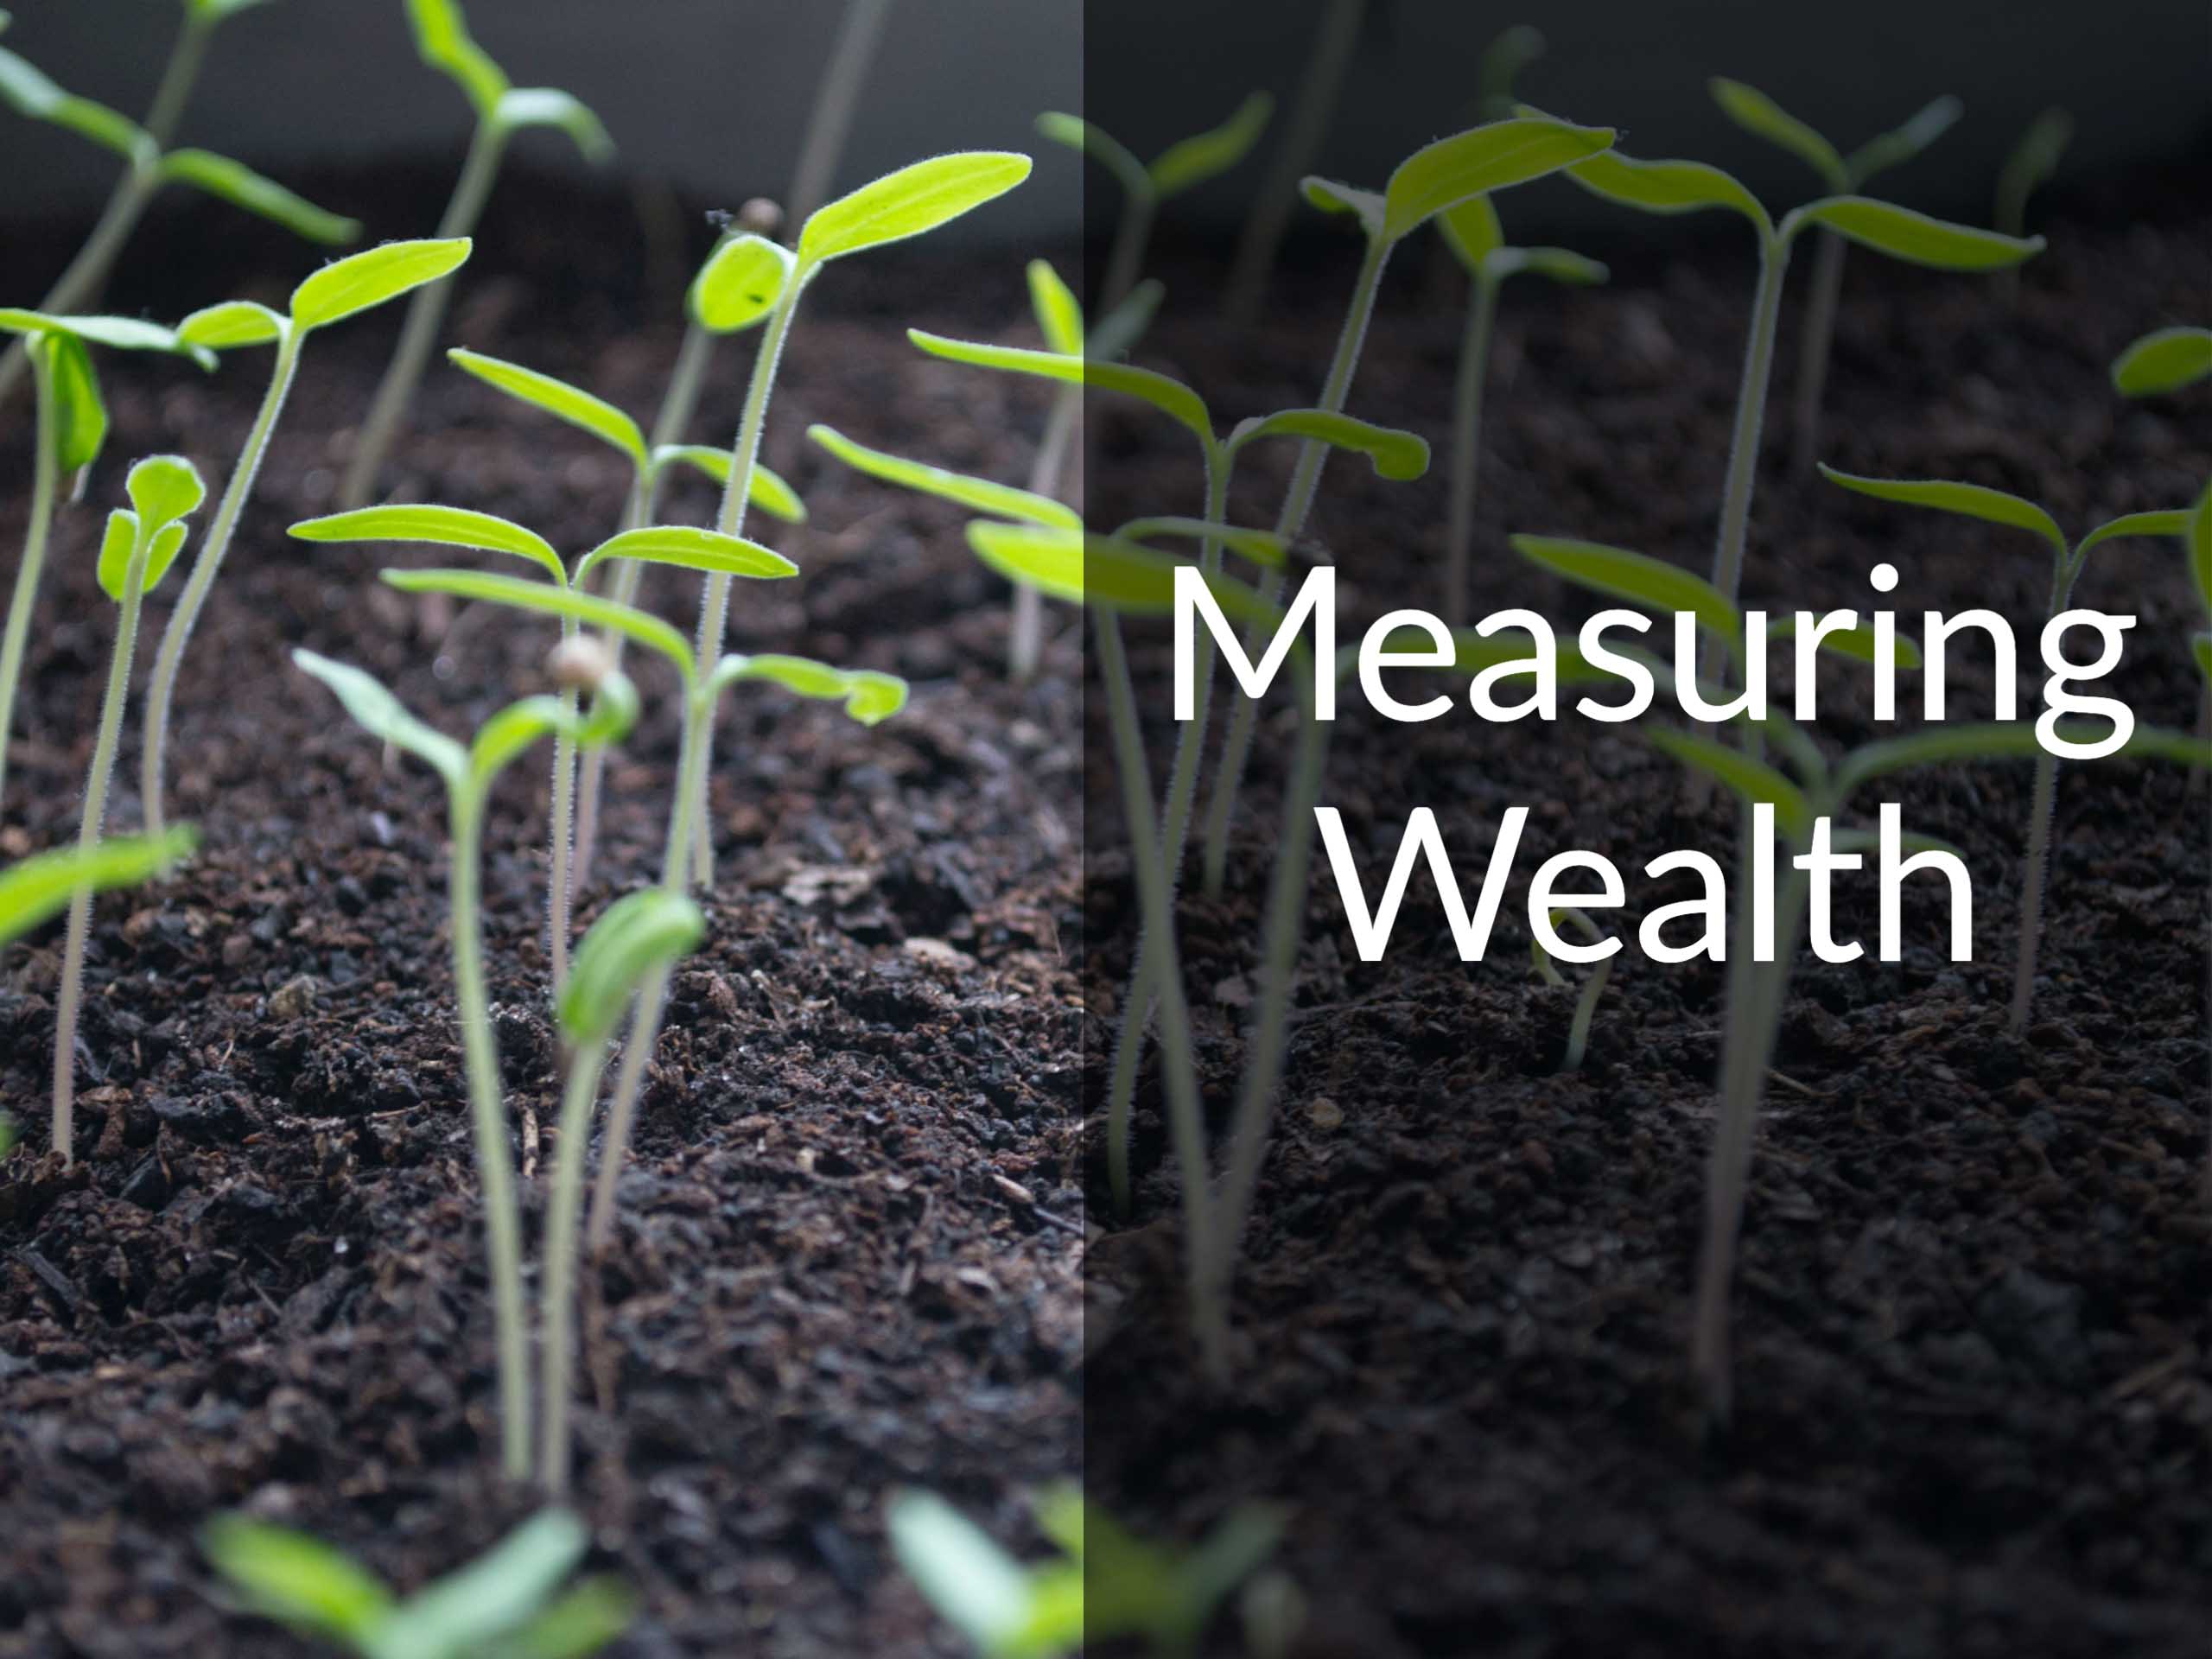 Plants sprouting with a caption that says "Measuring Wealth"